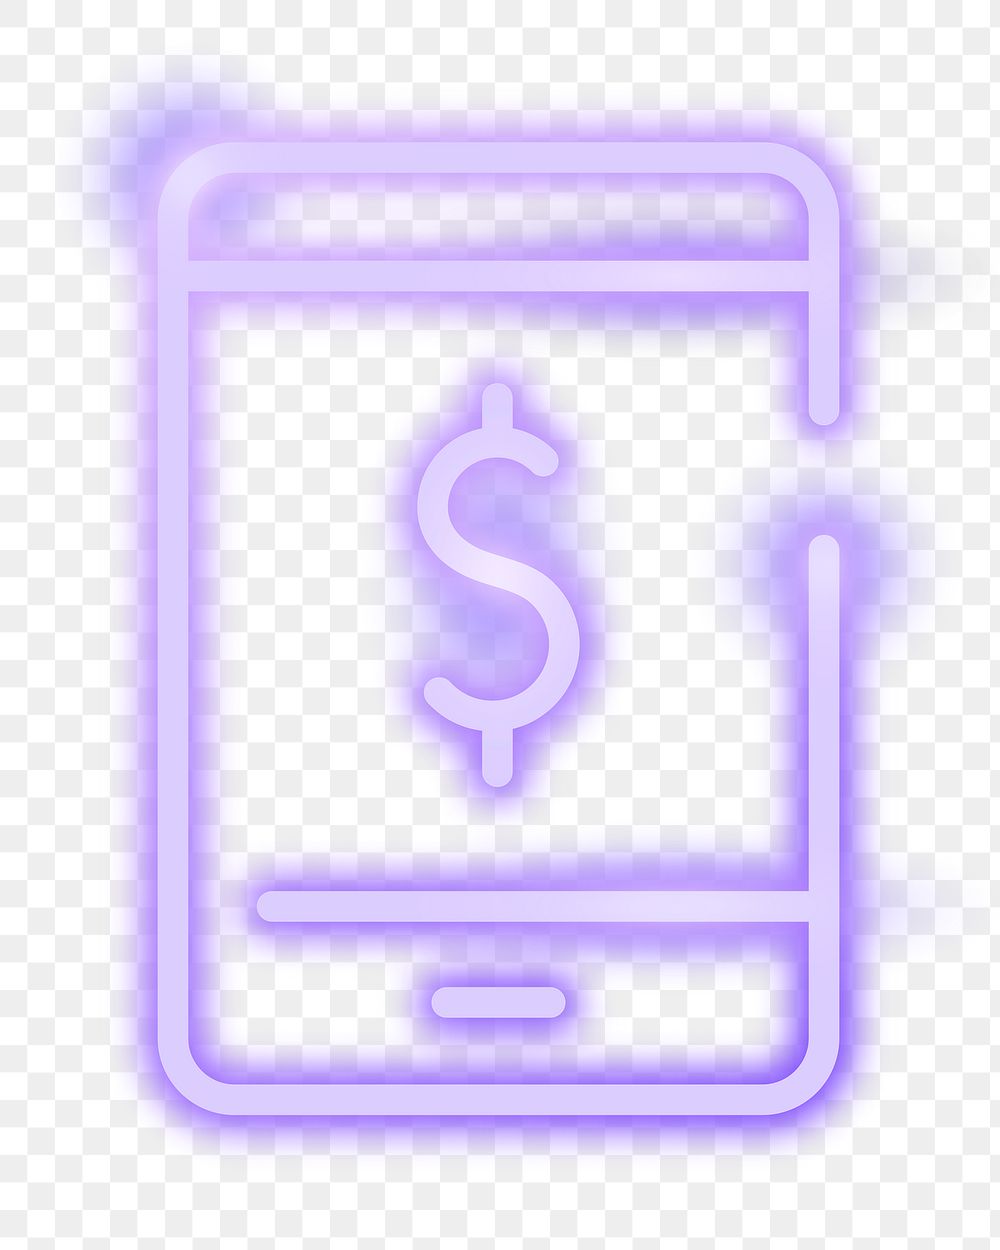 Png neon online banking icon, transparent background